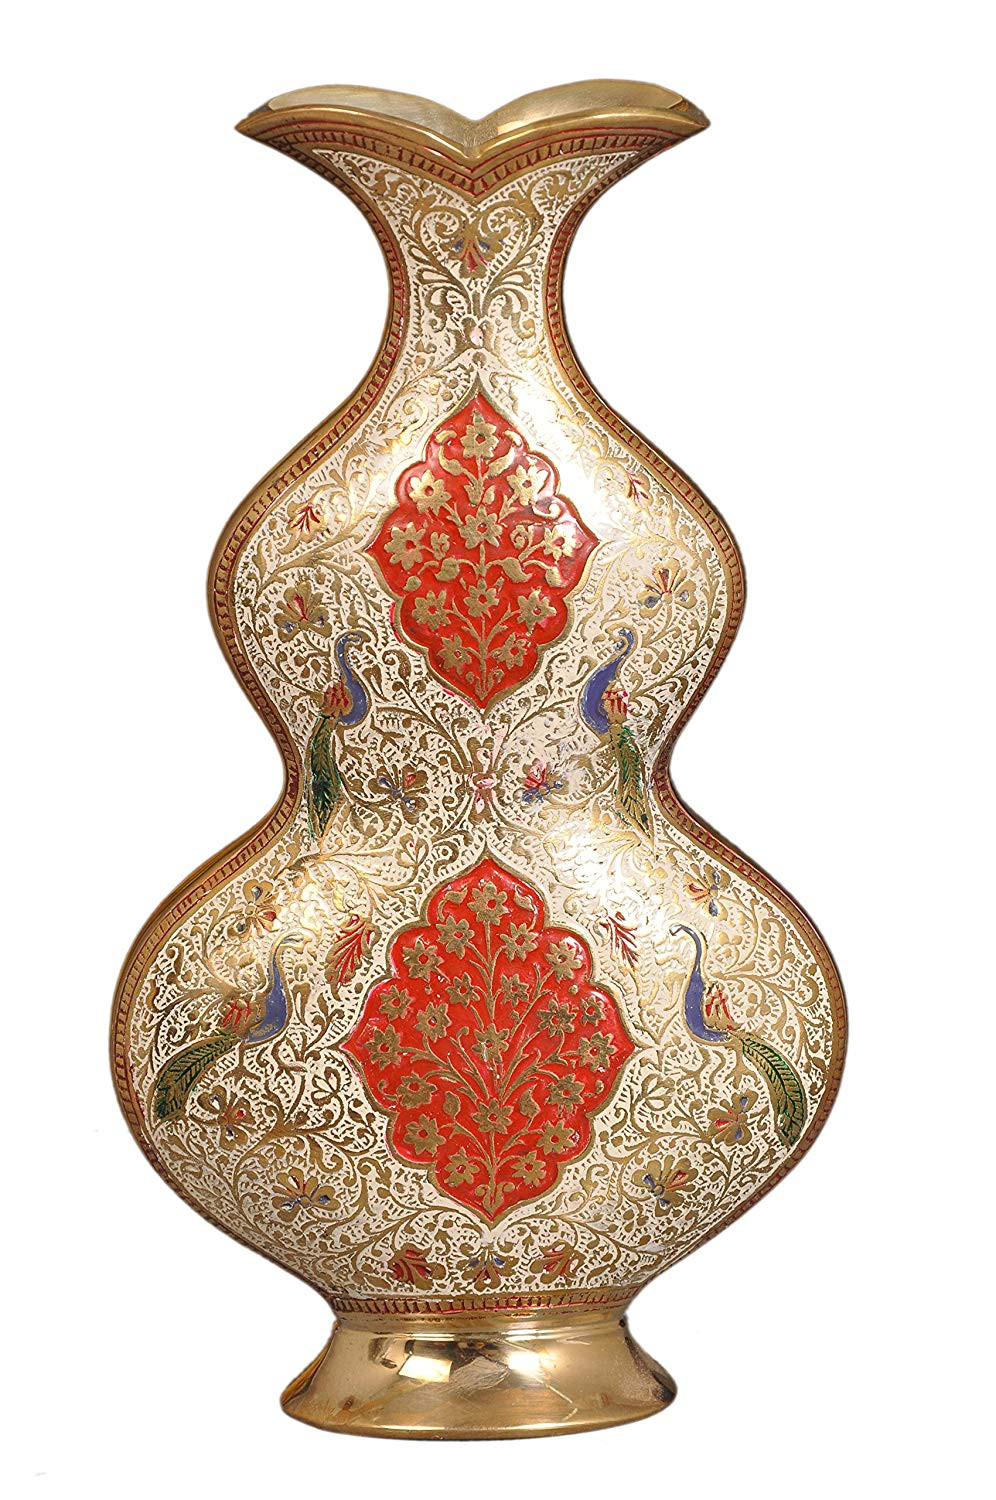 20 Cute Antique Brass Vase Made In India 2024 free download antique brass vase made in india of buy nutristar beautiful home ddecorative flower vase brass inside buy nutristar beautiful home ddecorative flower vase brass traditional red online at low